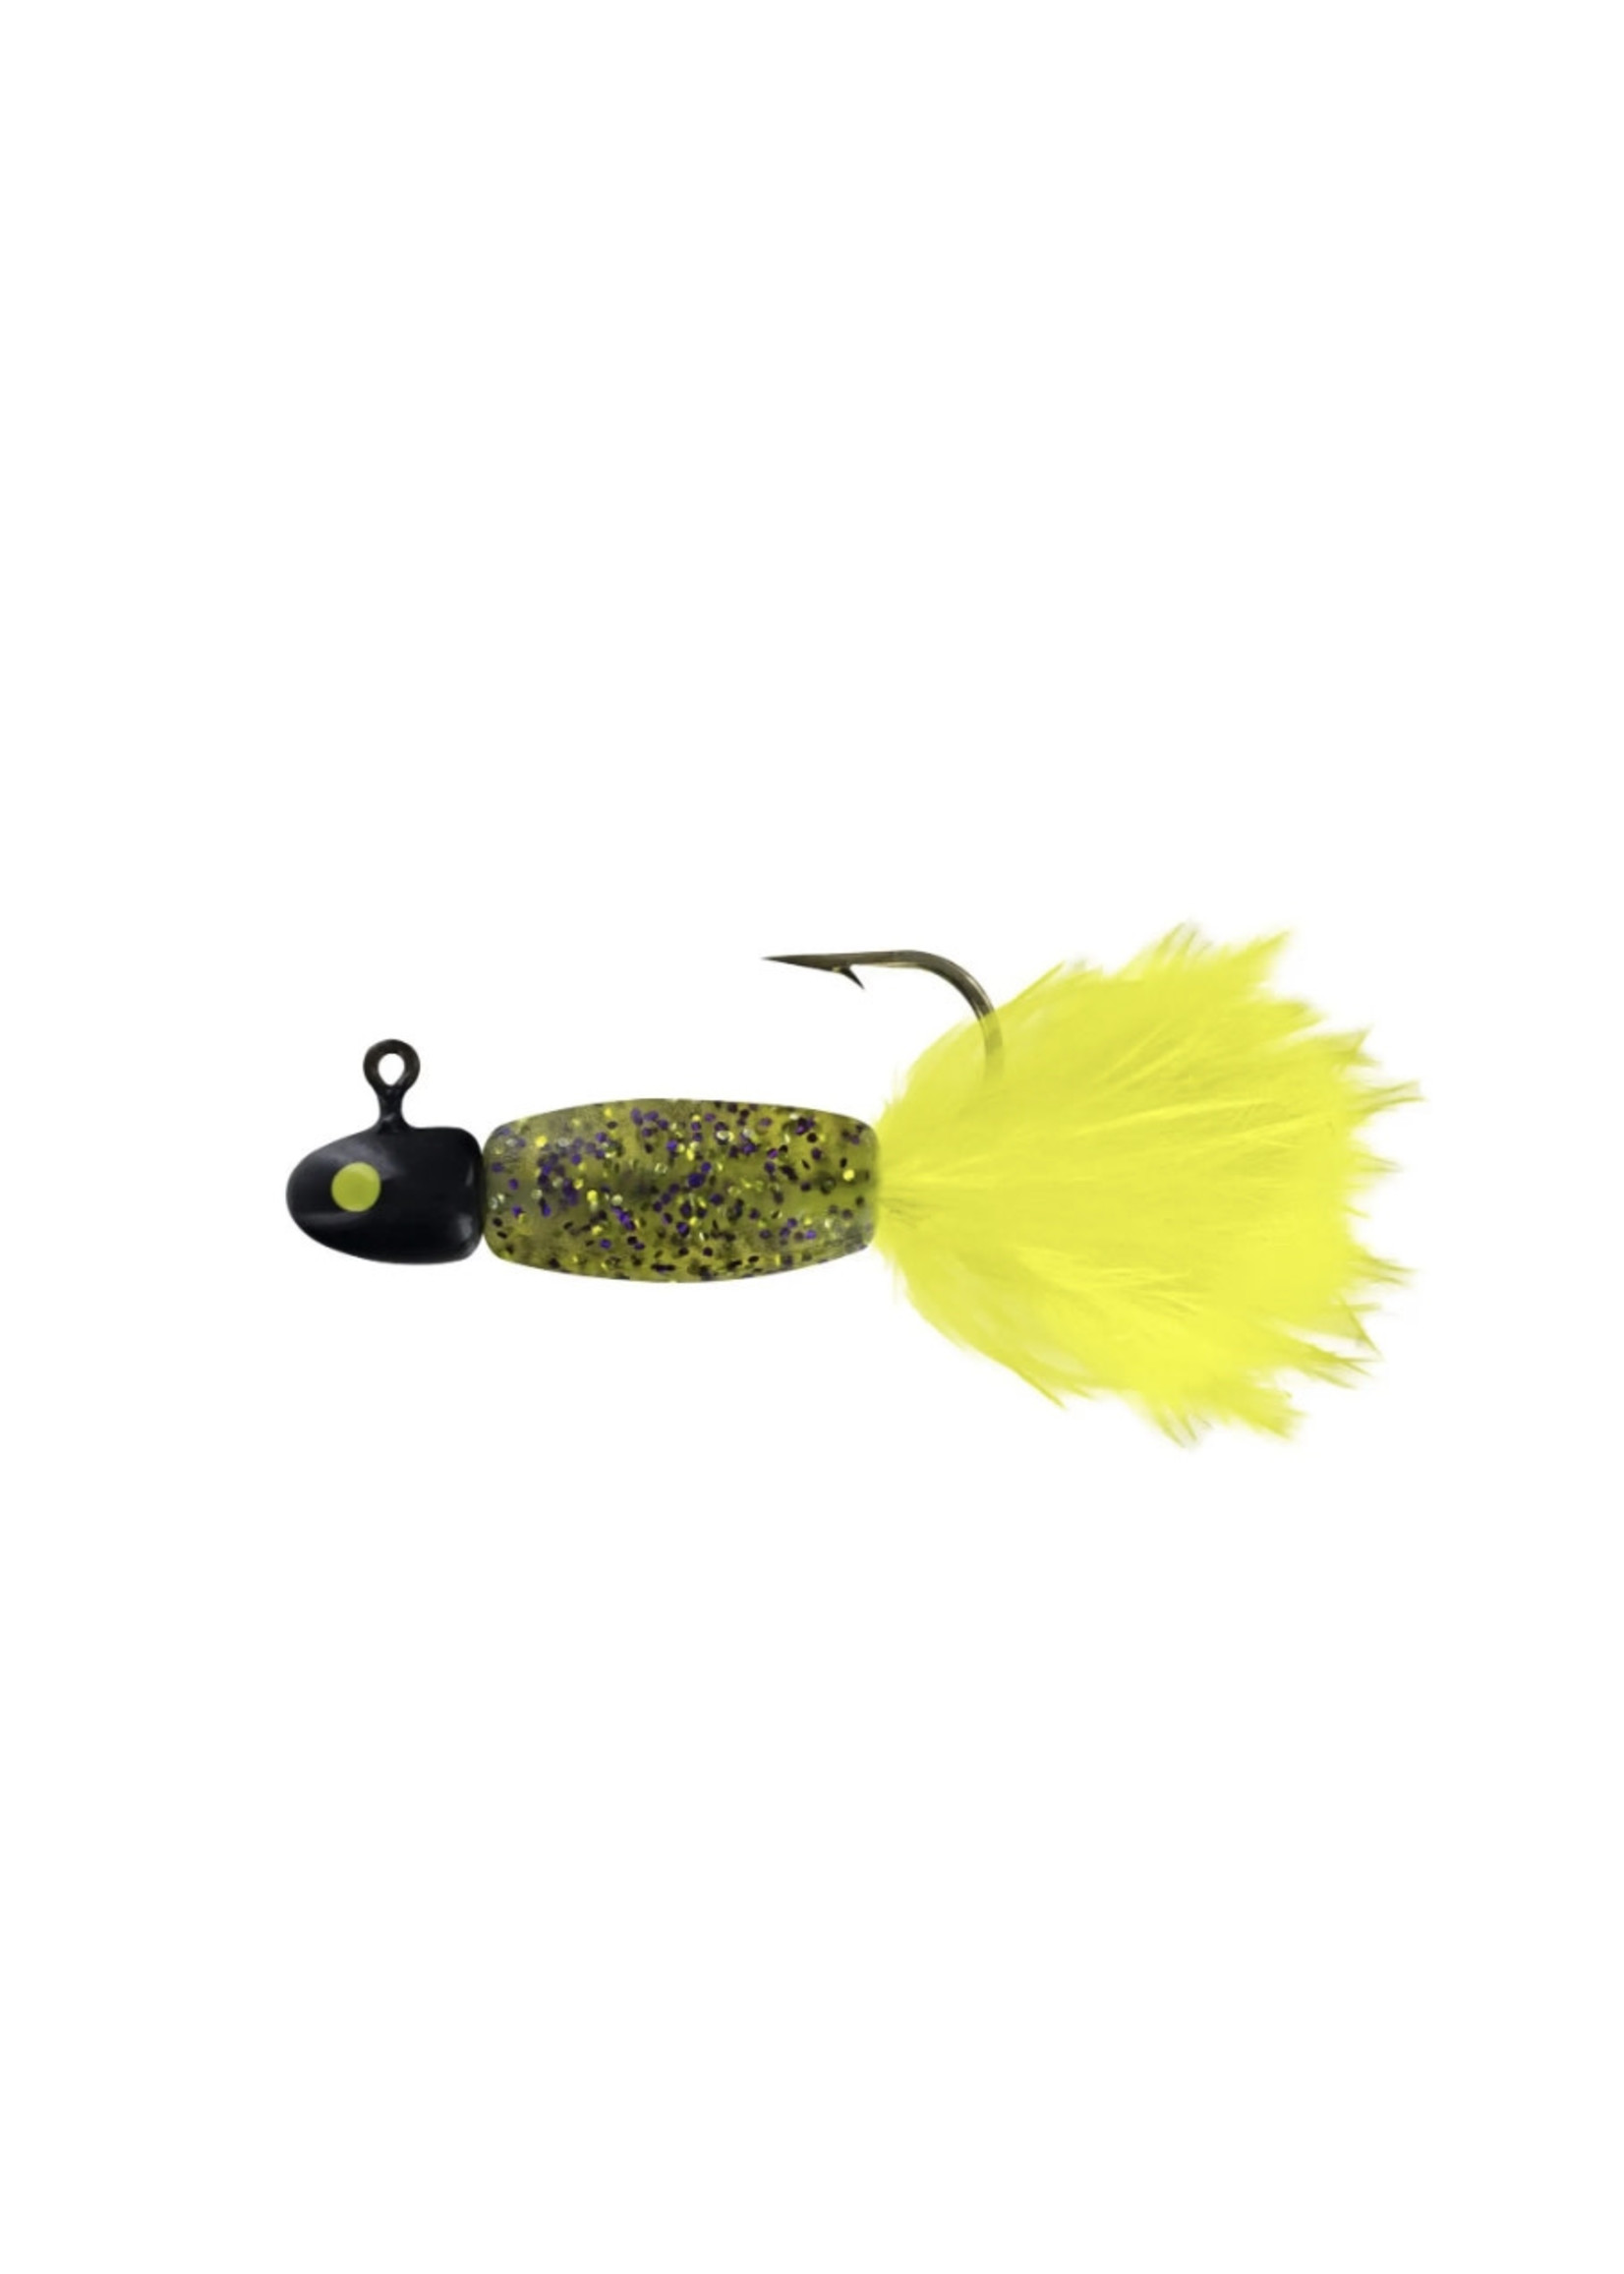 BIG BITE BAITS BIG BITE BAITS 1.5' LINDNER PANFISH SPECIAL - Rugged Shoal  Outfitters